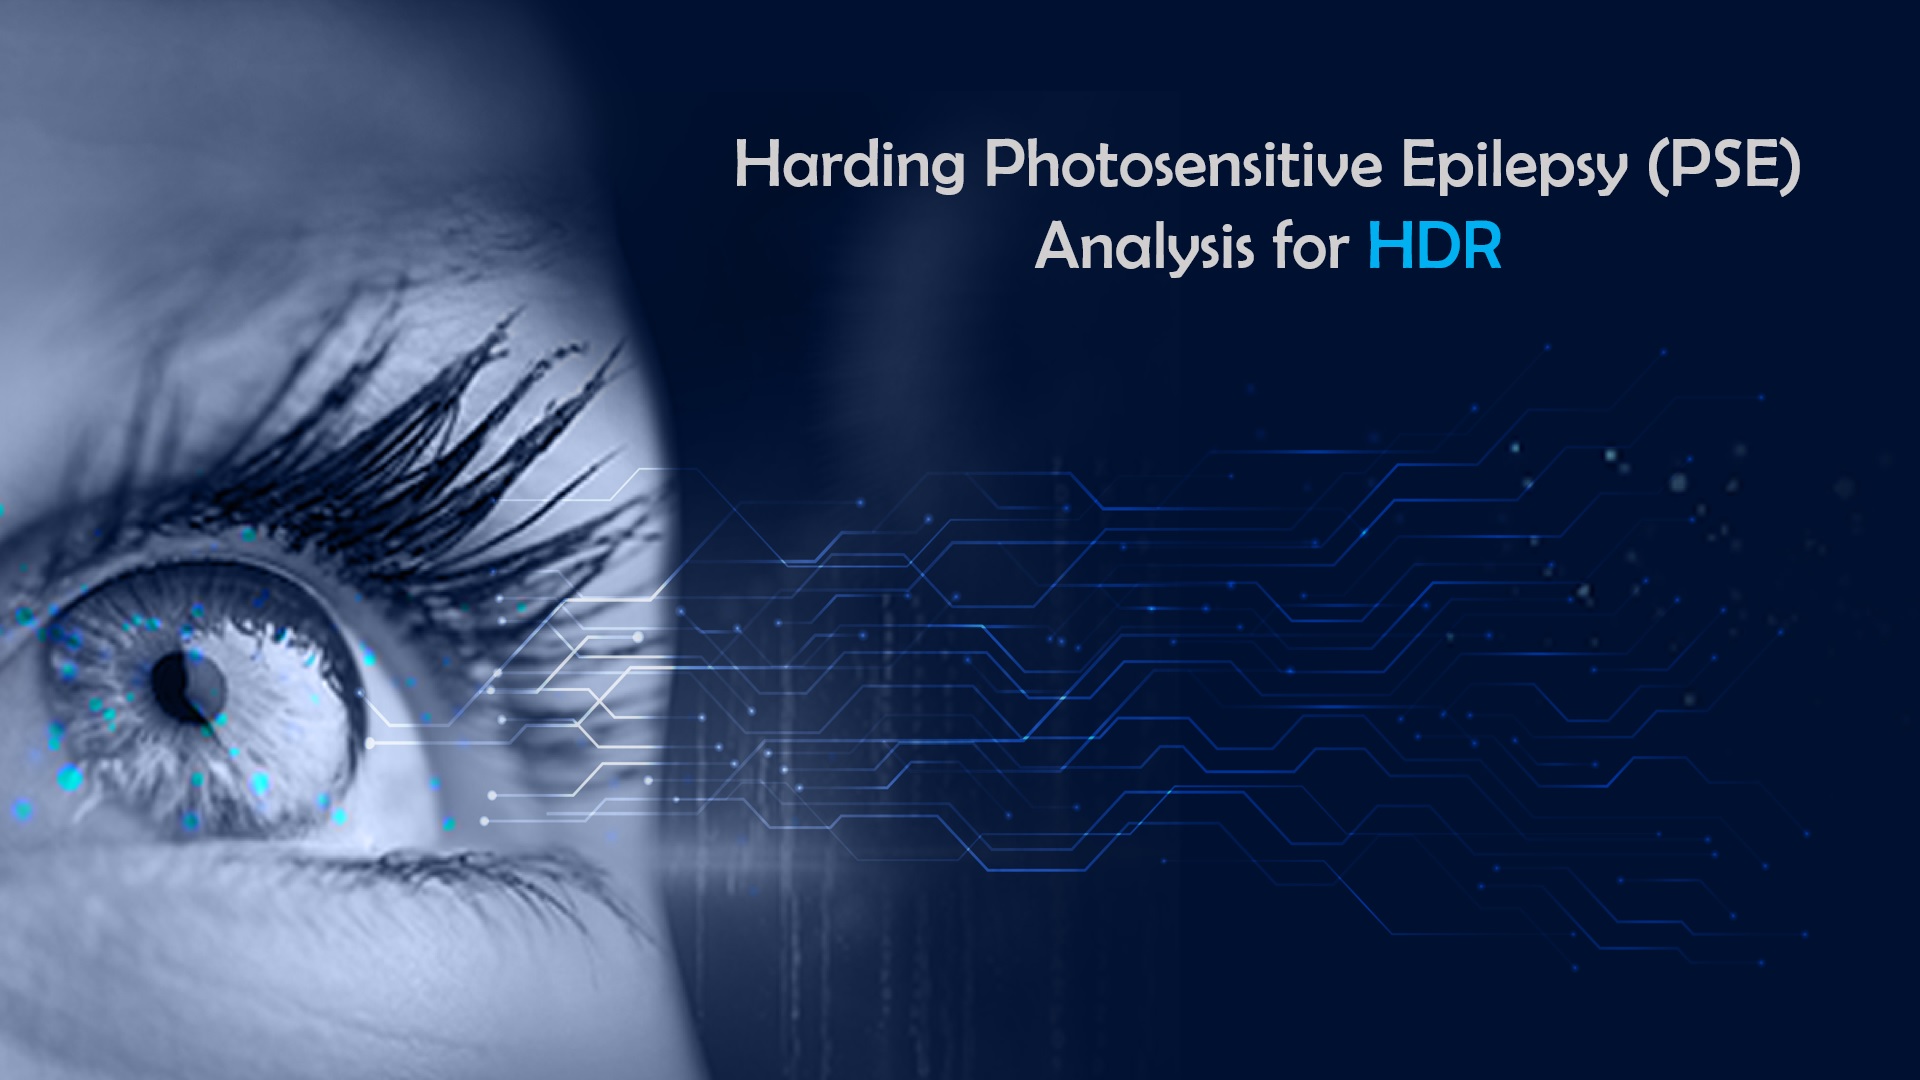 Photosensitive Epilepsy Detection for HDR